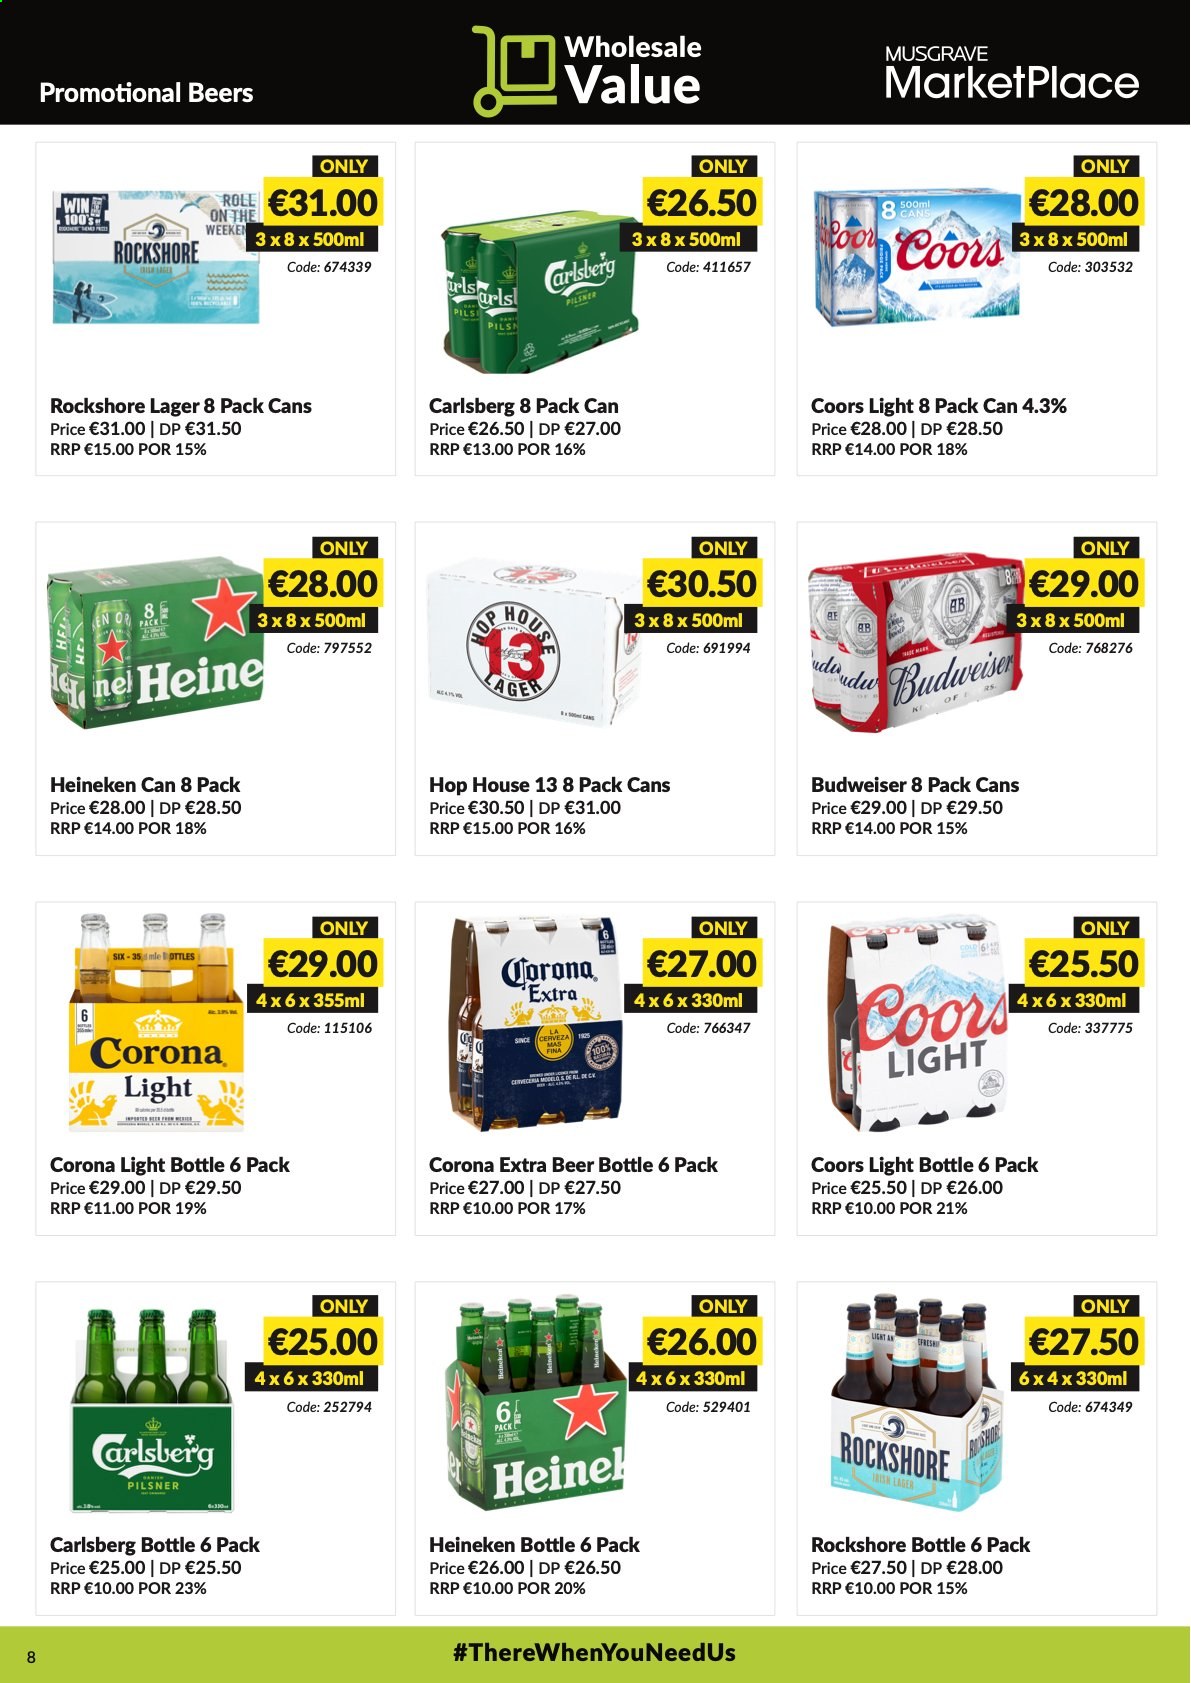 thumbnail - MUSGRAVE Market Place offer  - 04.07.2021 - 31.07.2021 - Sales products - Budweiser, Coors, beer, Corona Extra, Heineken, Carlsberg, Lager, Rockshore. Page 8.